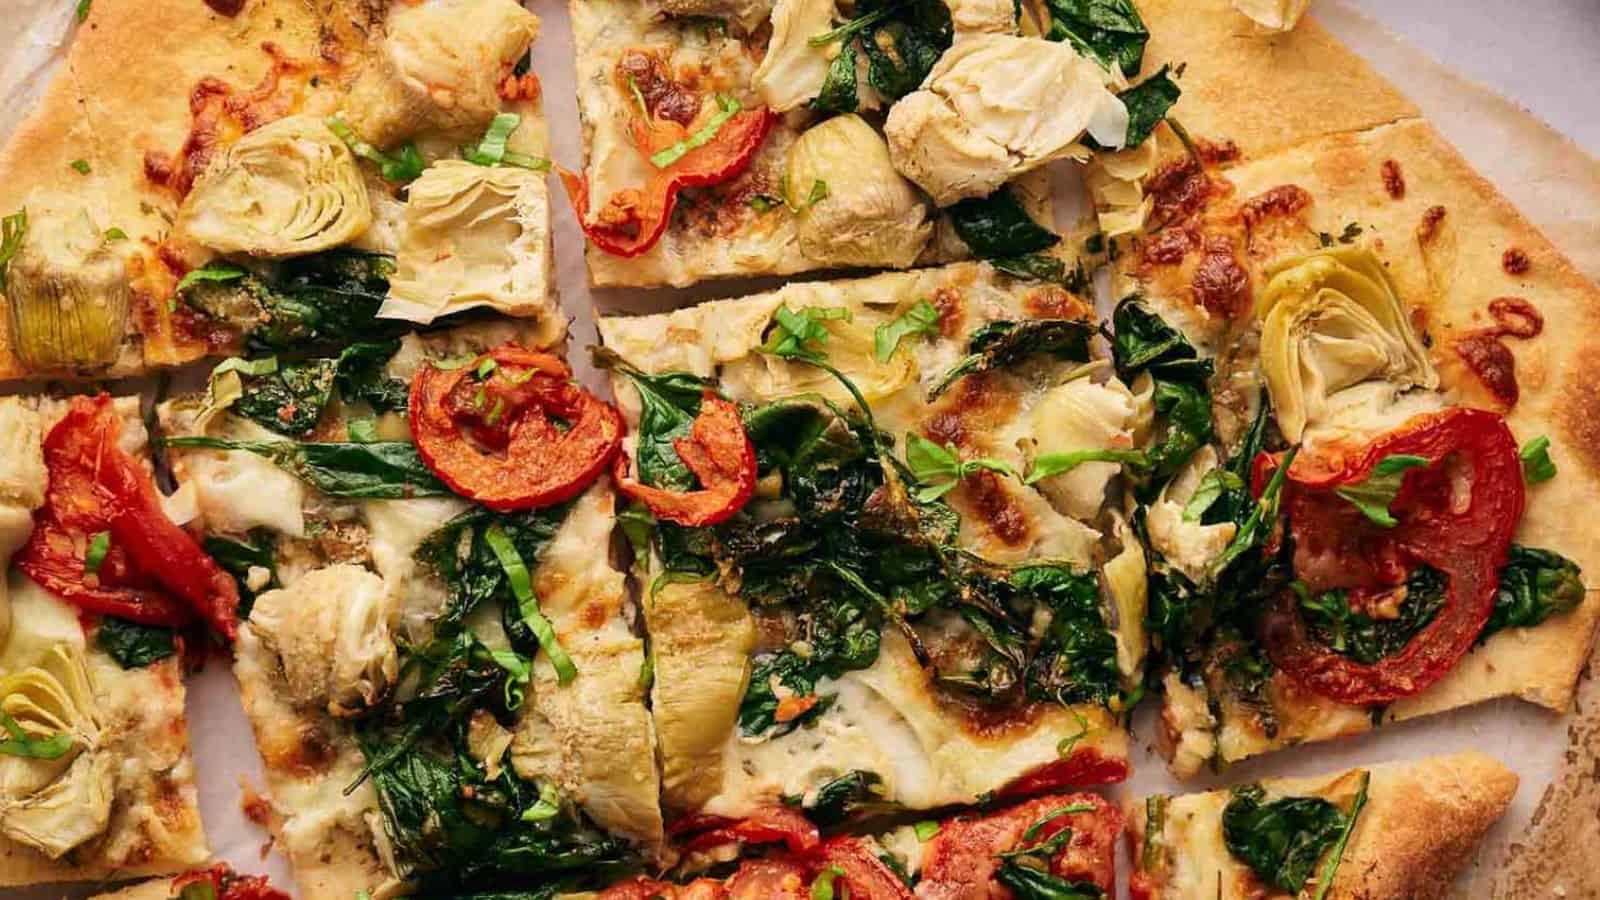 A pizza with artichokes, tomatoes and spinach.